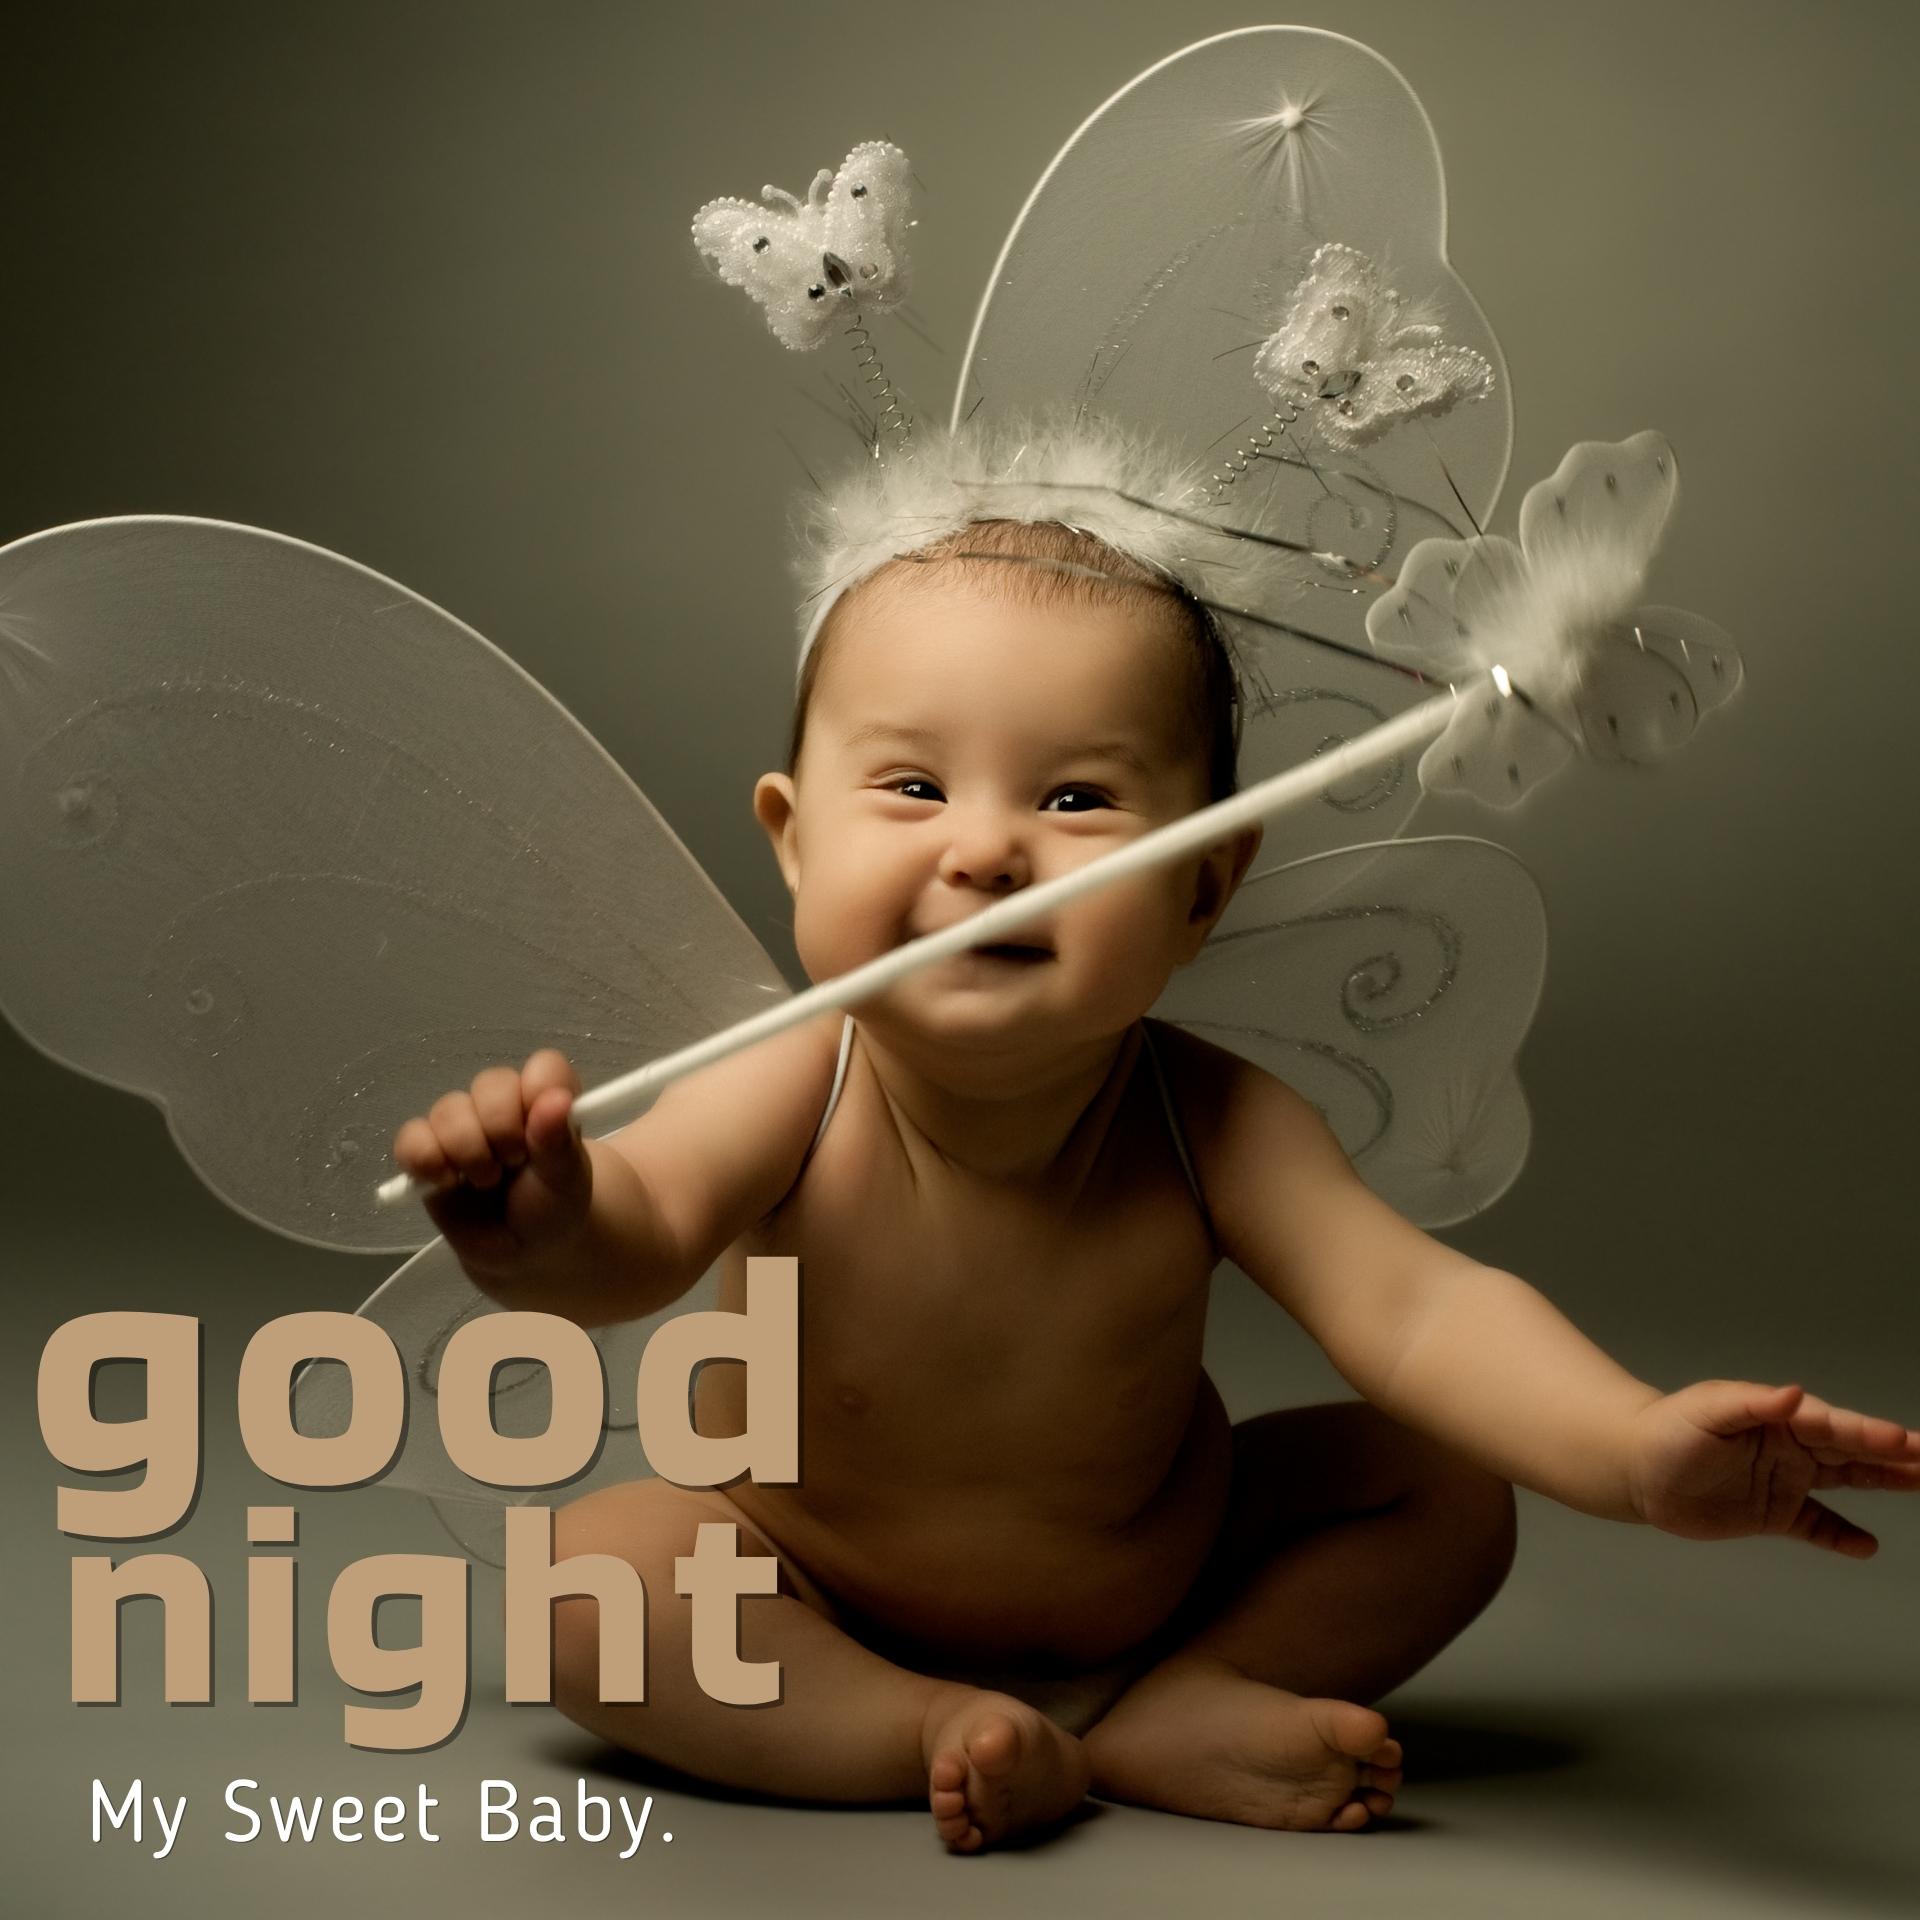 Cute Baby Saying Good Night Images for Whatsapp